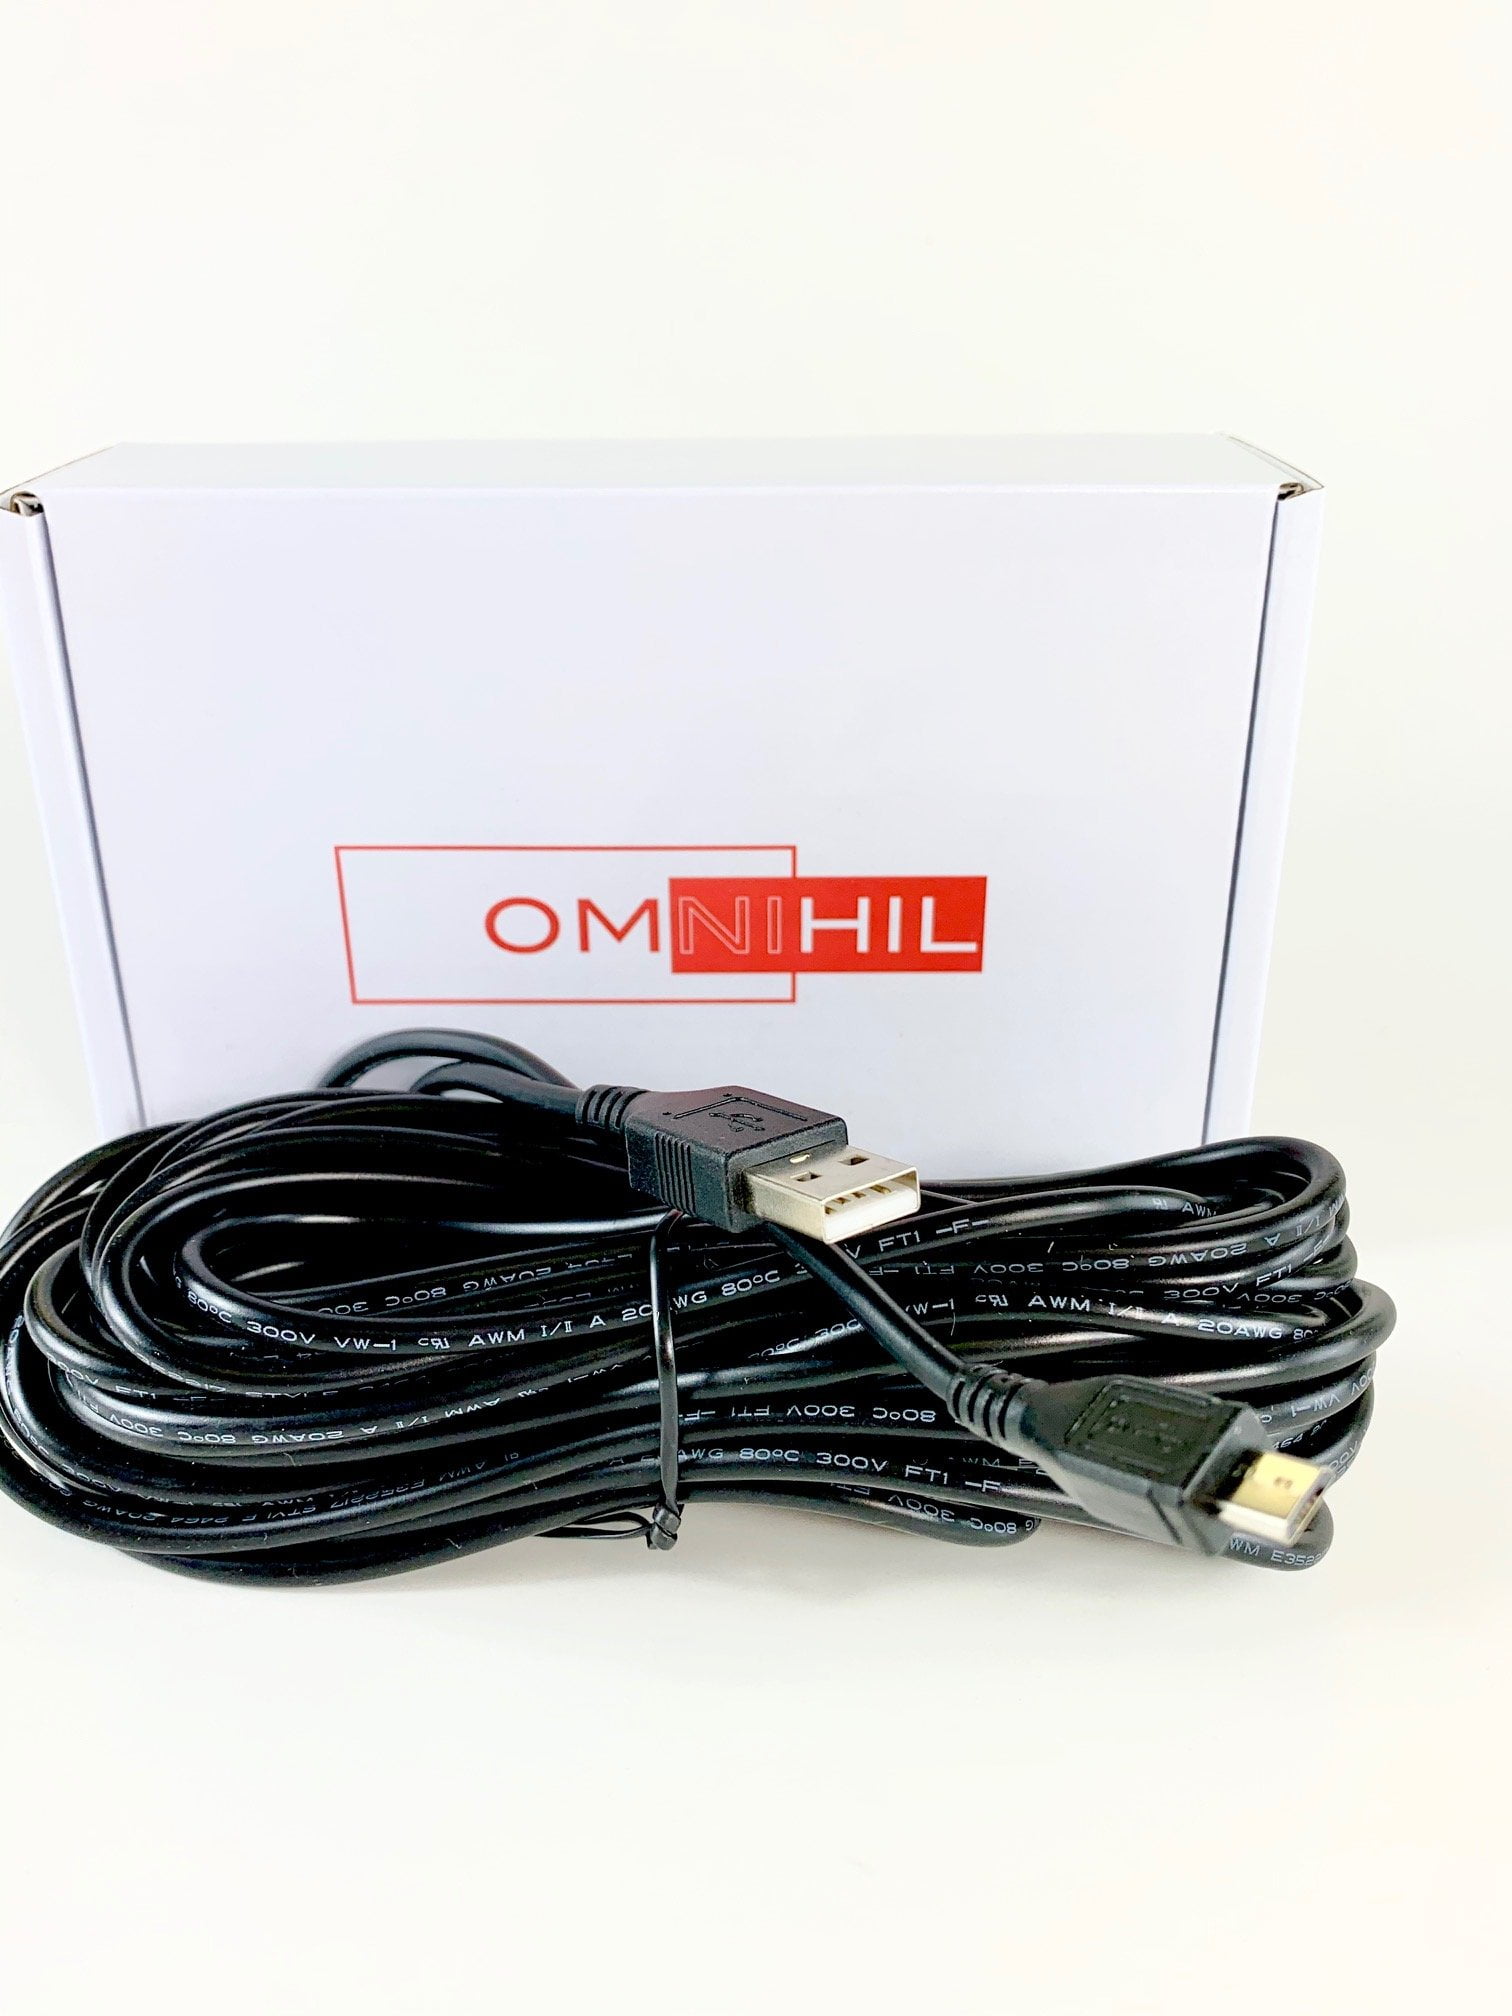 OMNIHIL 8 Feet Long High Speed USB 2.0 Cable Compatible with Brother MFC-J825DW 